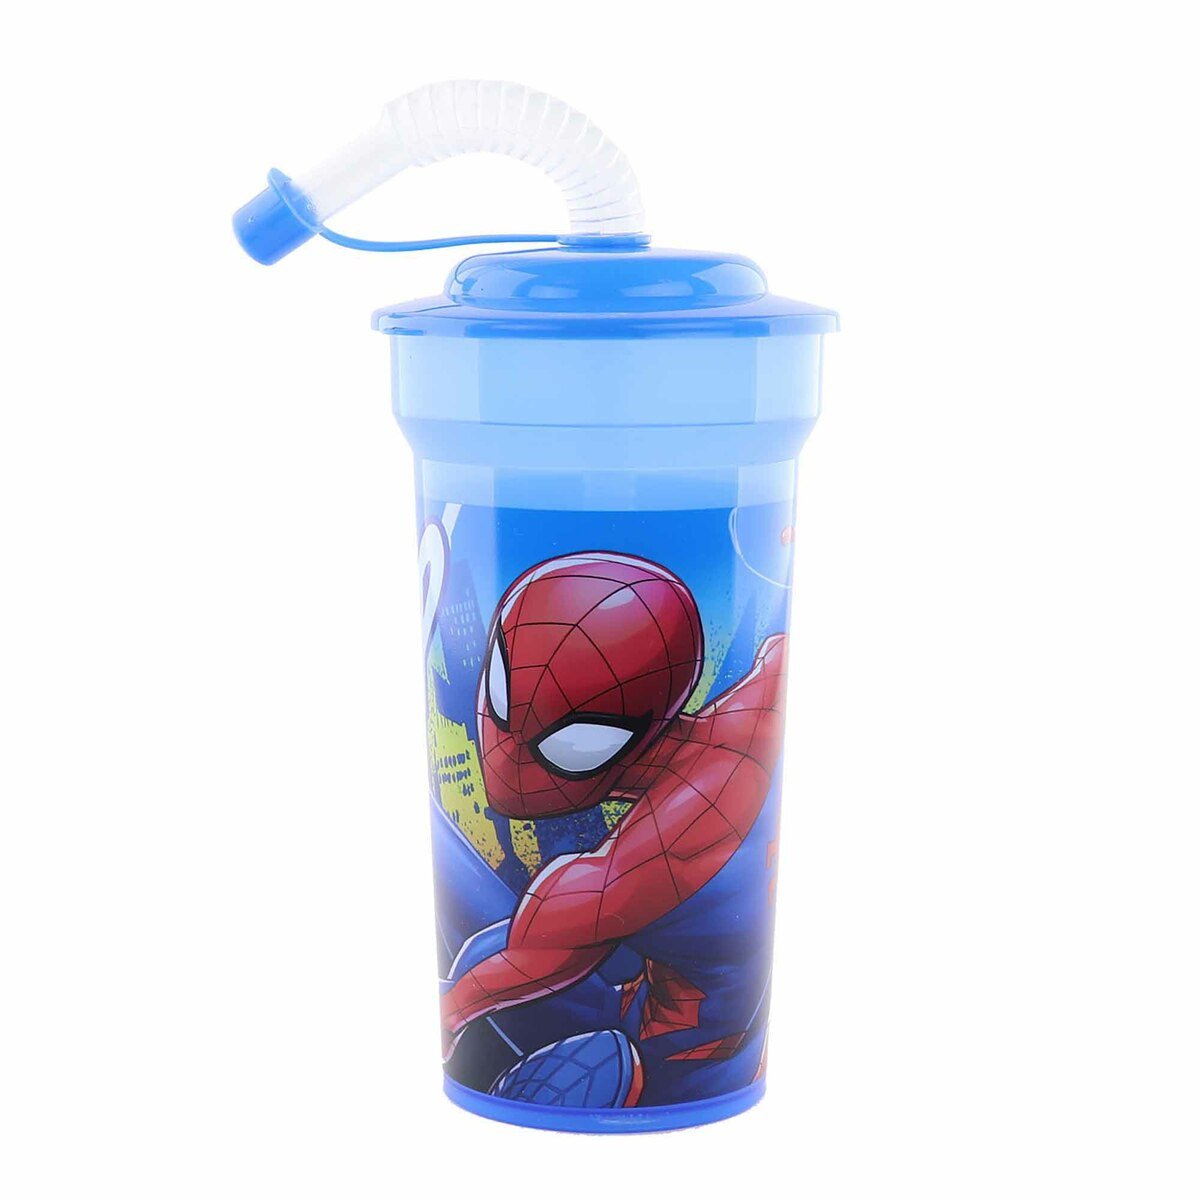 Marvel Spiderman Print Cup With Straw & Lid 400ml MV15353A